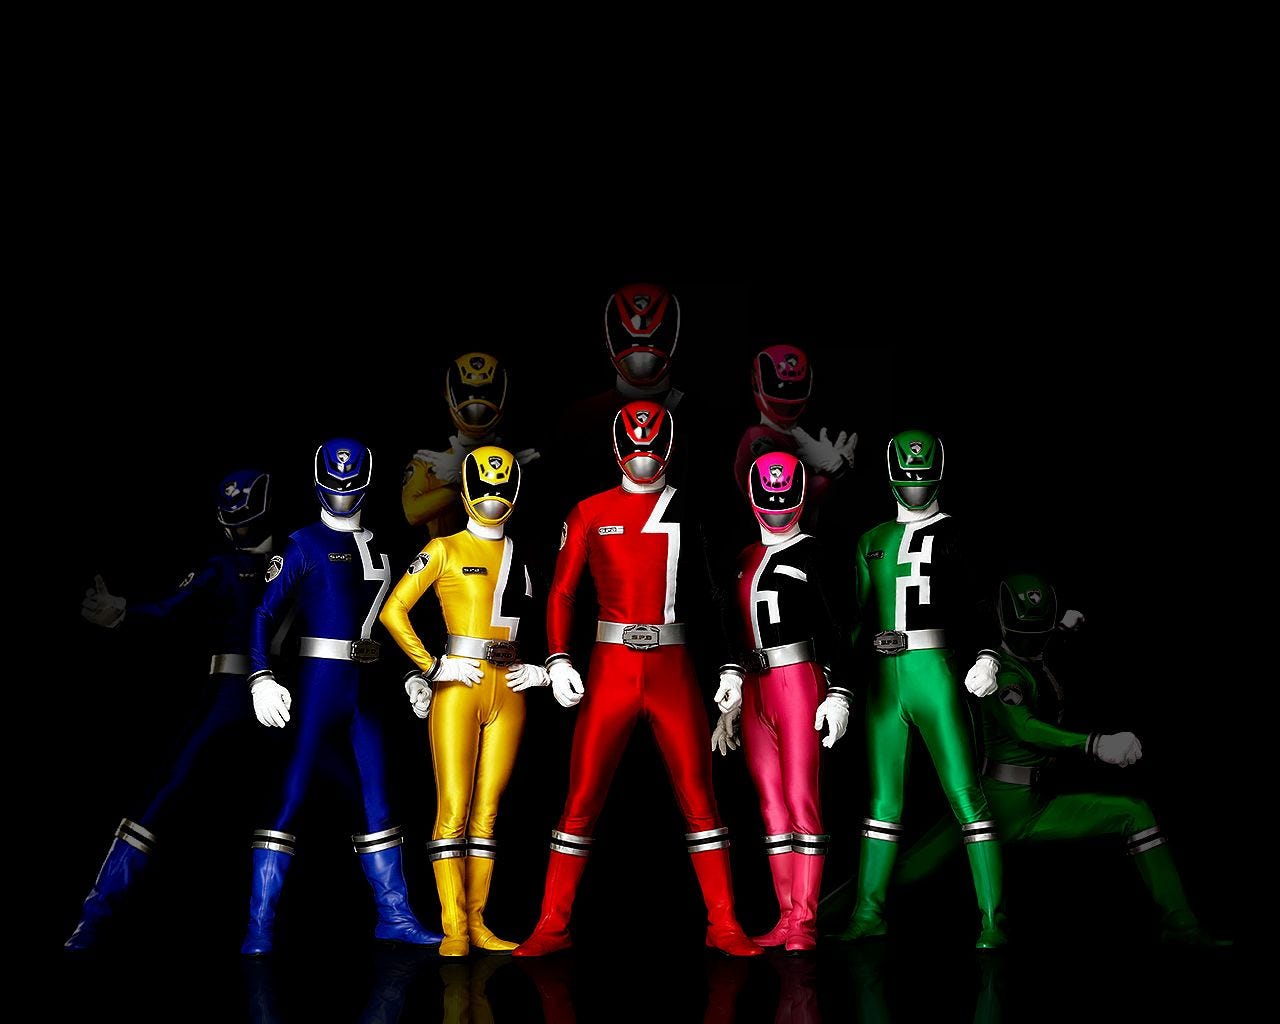 5+ lessons I learned from the Power Rangers | by Suresh Kumar | Medium